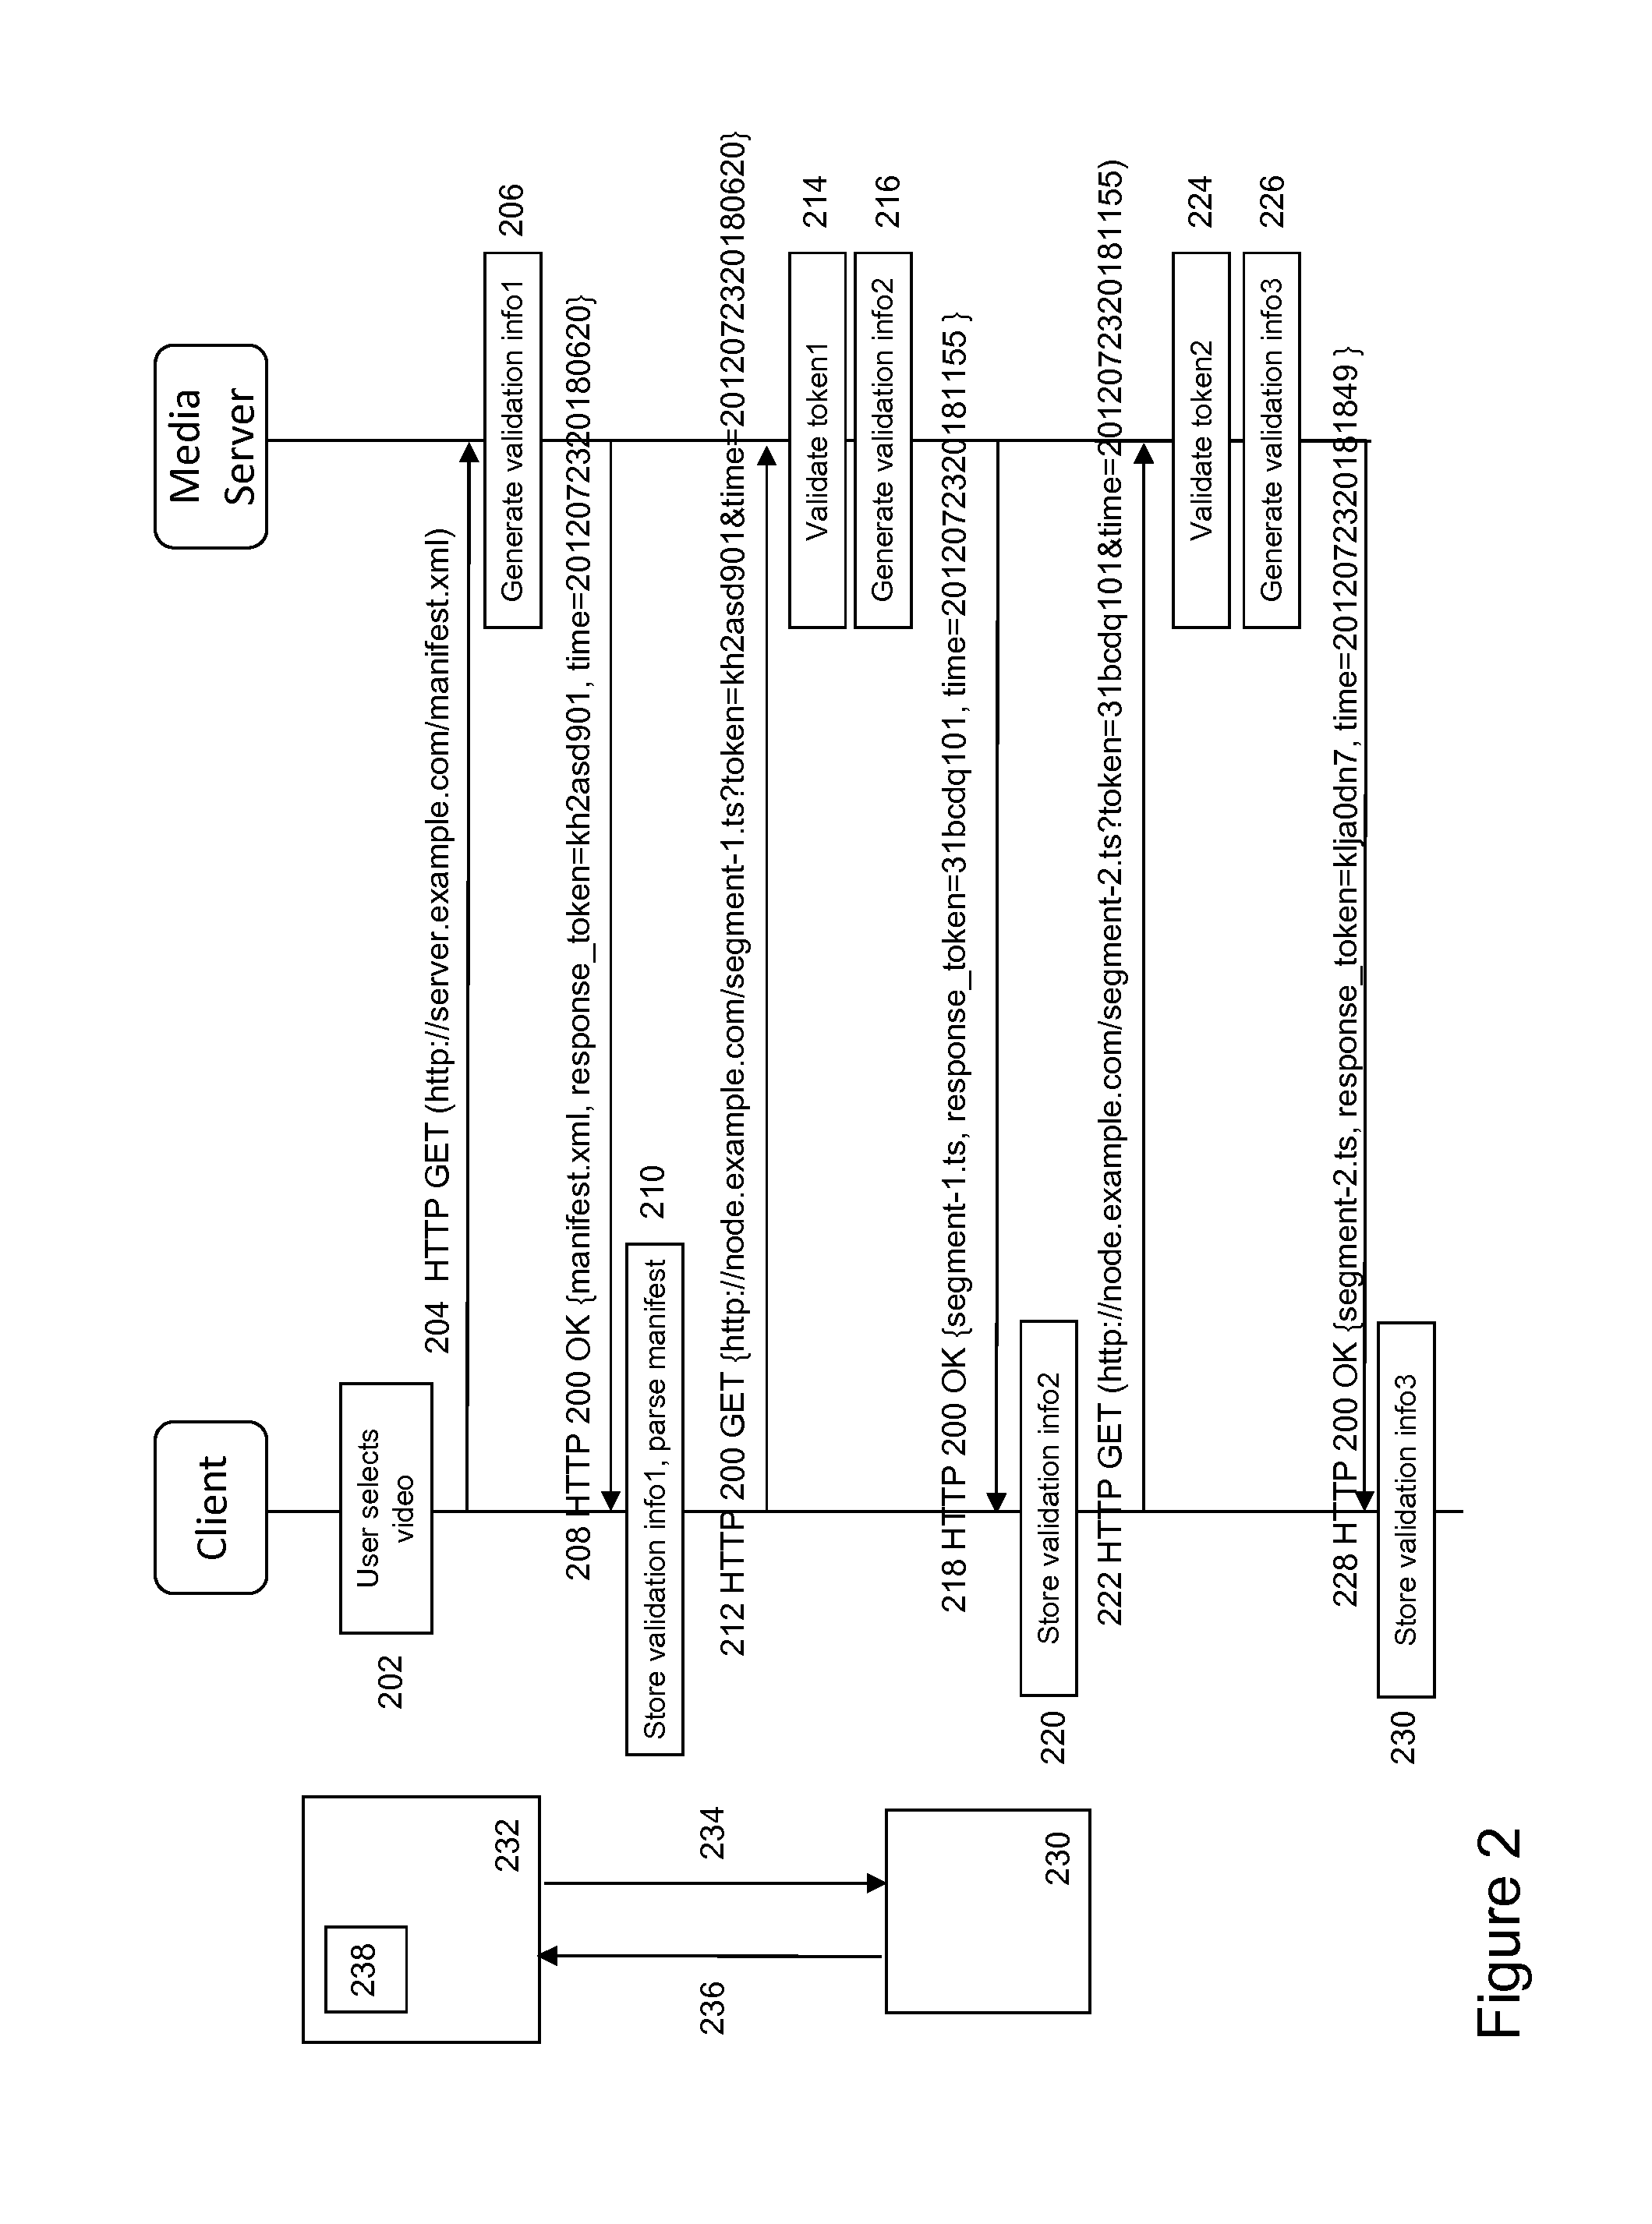 Token-Based Validation Method for Segmented Content Delivery